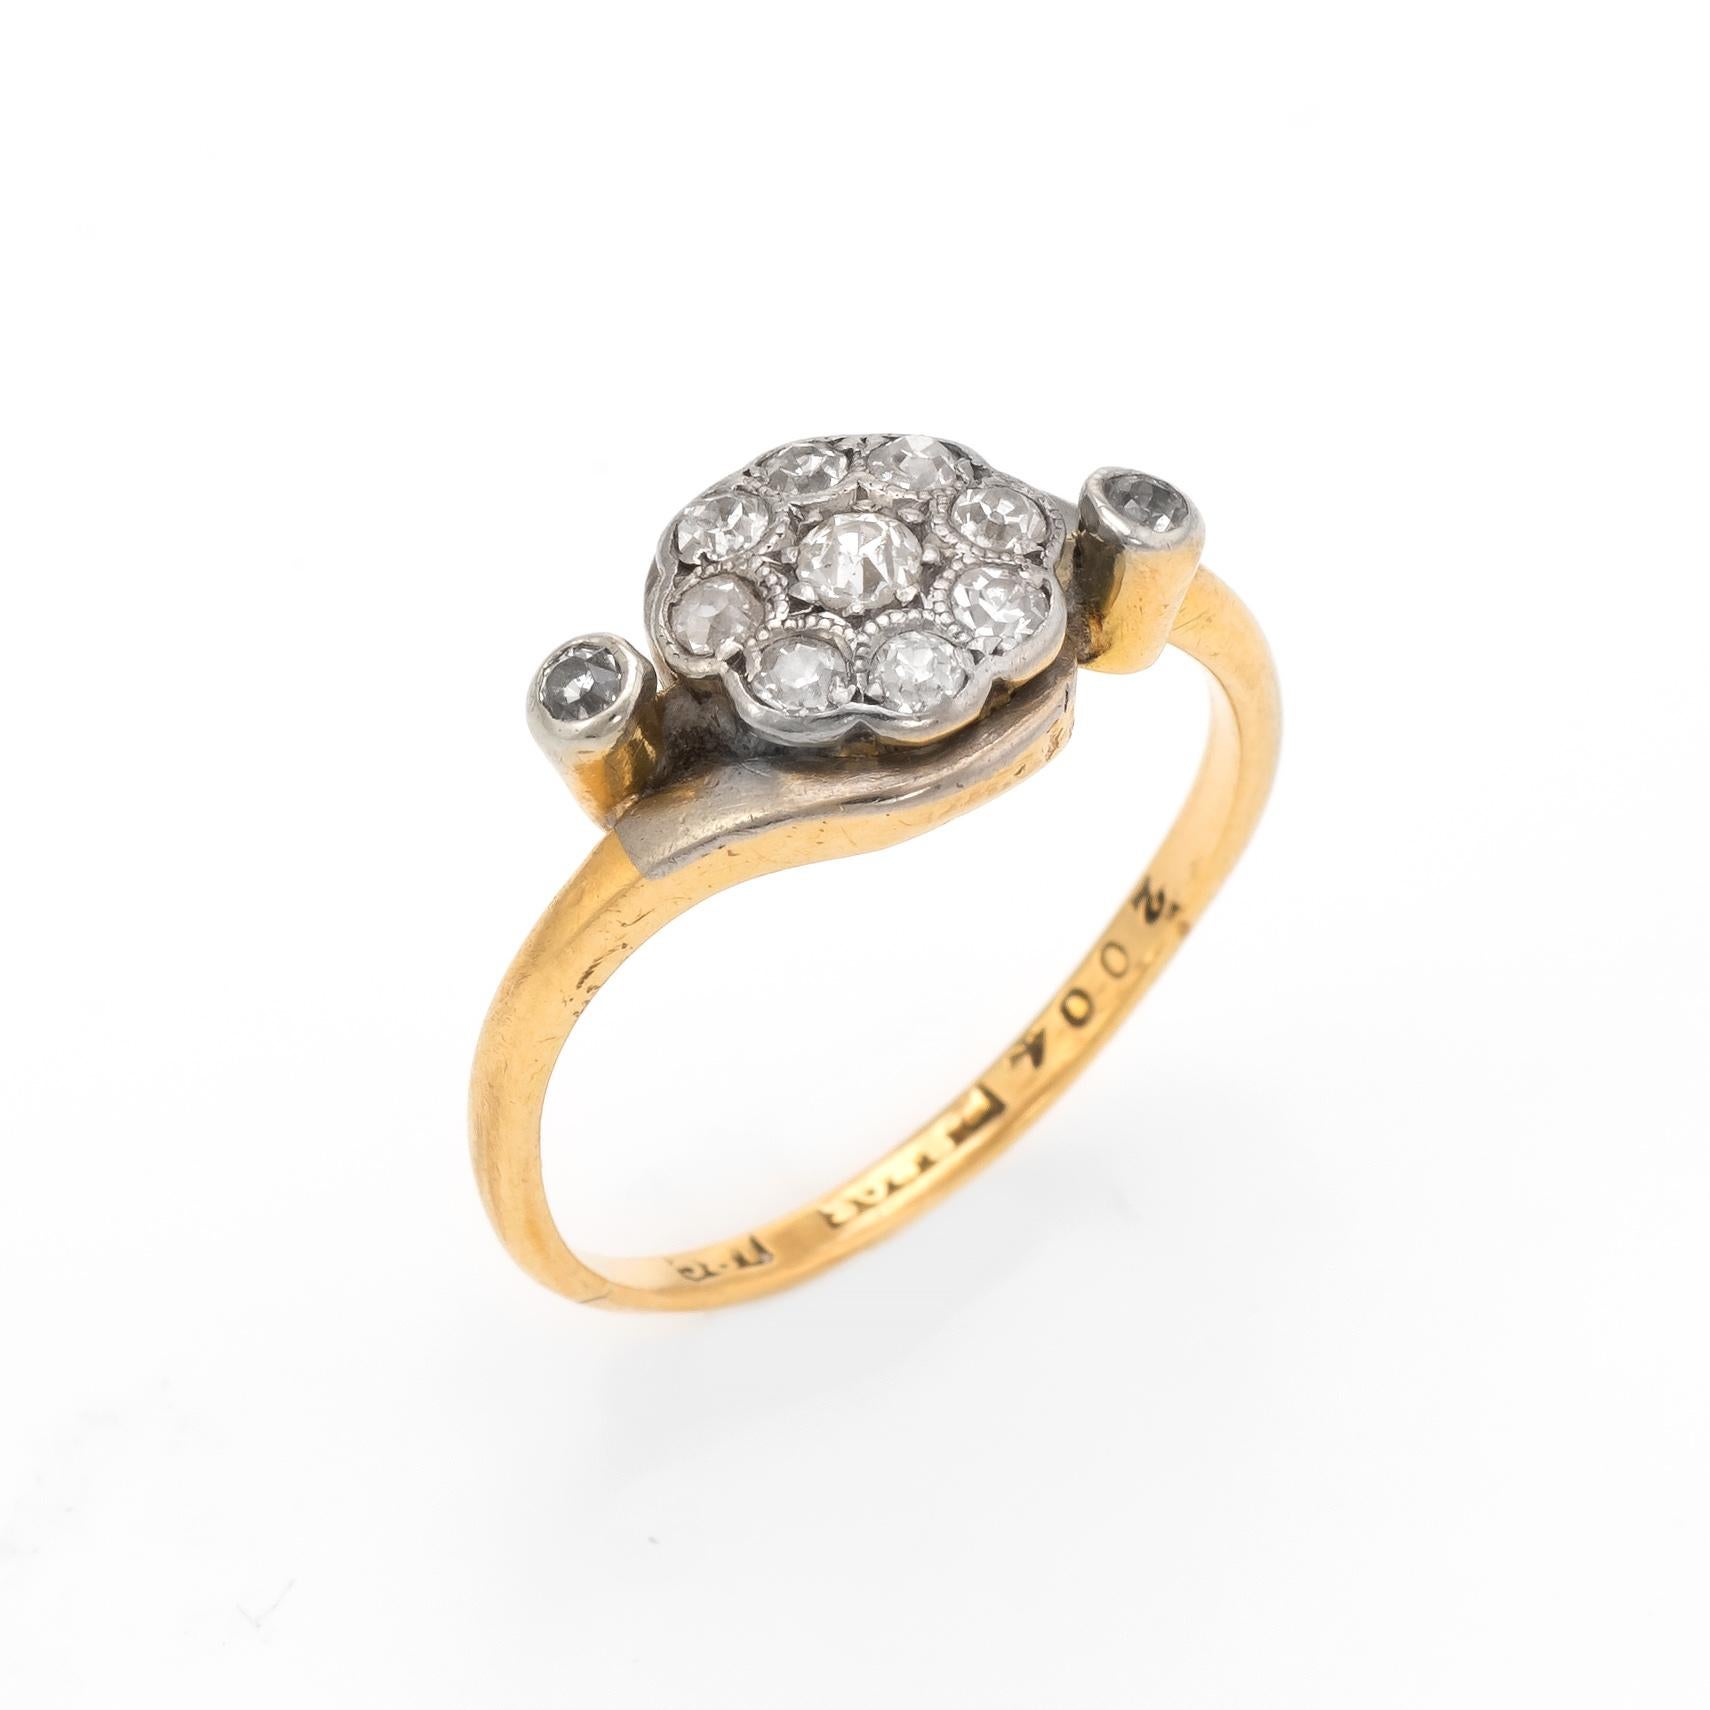 Finely detailed antique Victorian diamond cluster ring set with old mine cut diamonds (circa 1880s to 1900s), crafted in 18 karat yellow & gold and 900 platinum. 

The old mine cut diamonds graduate in size from the center (estimated at 0.05 carats)